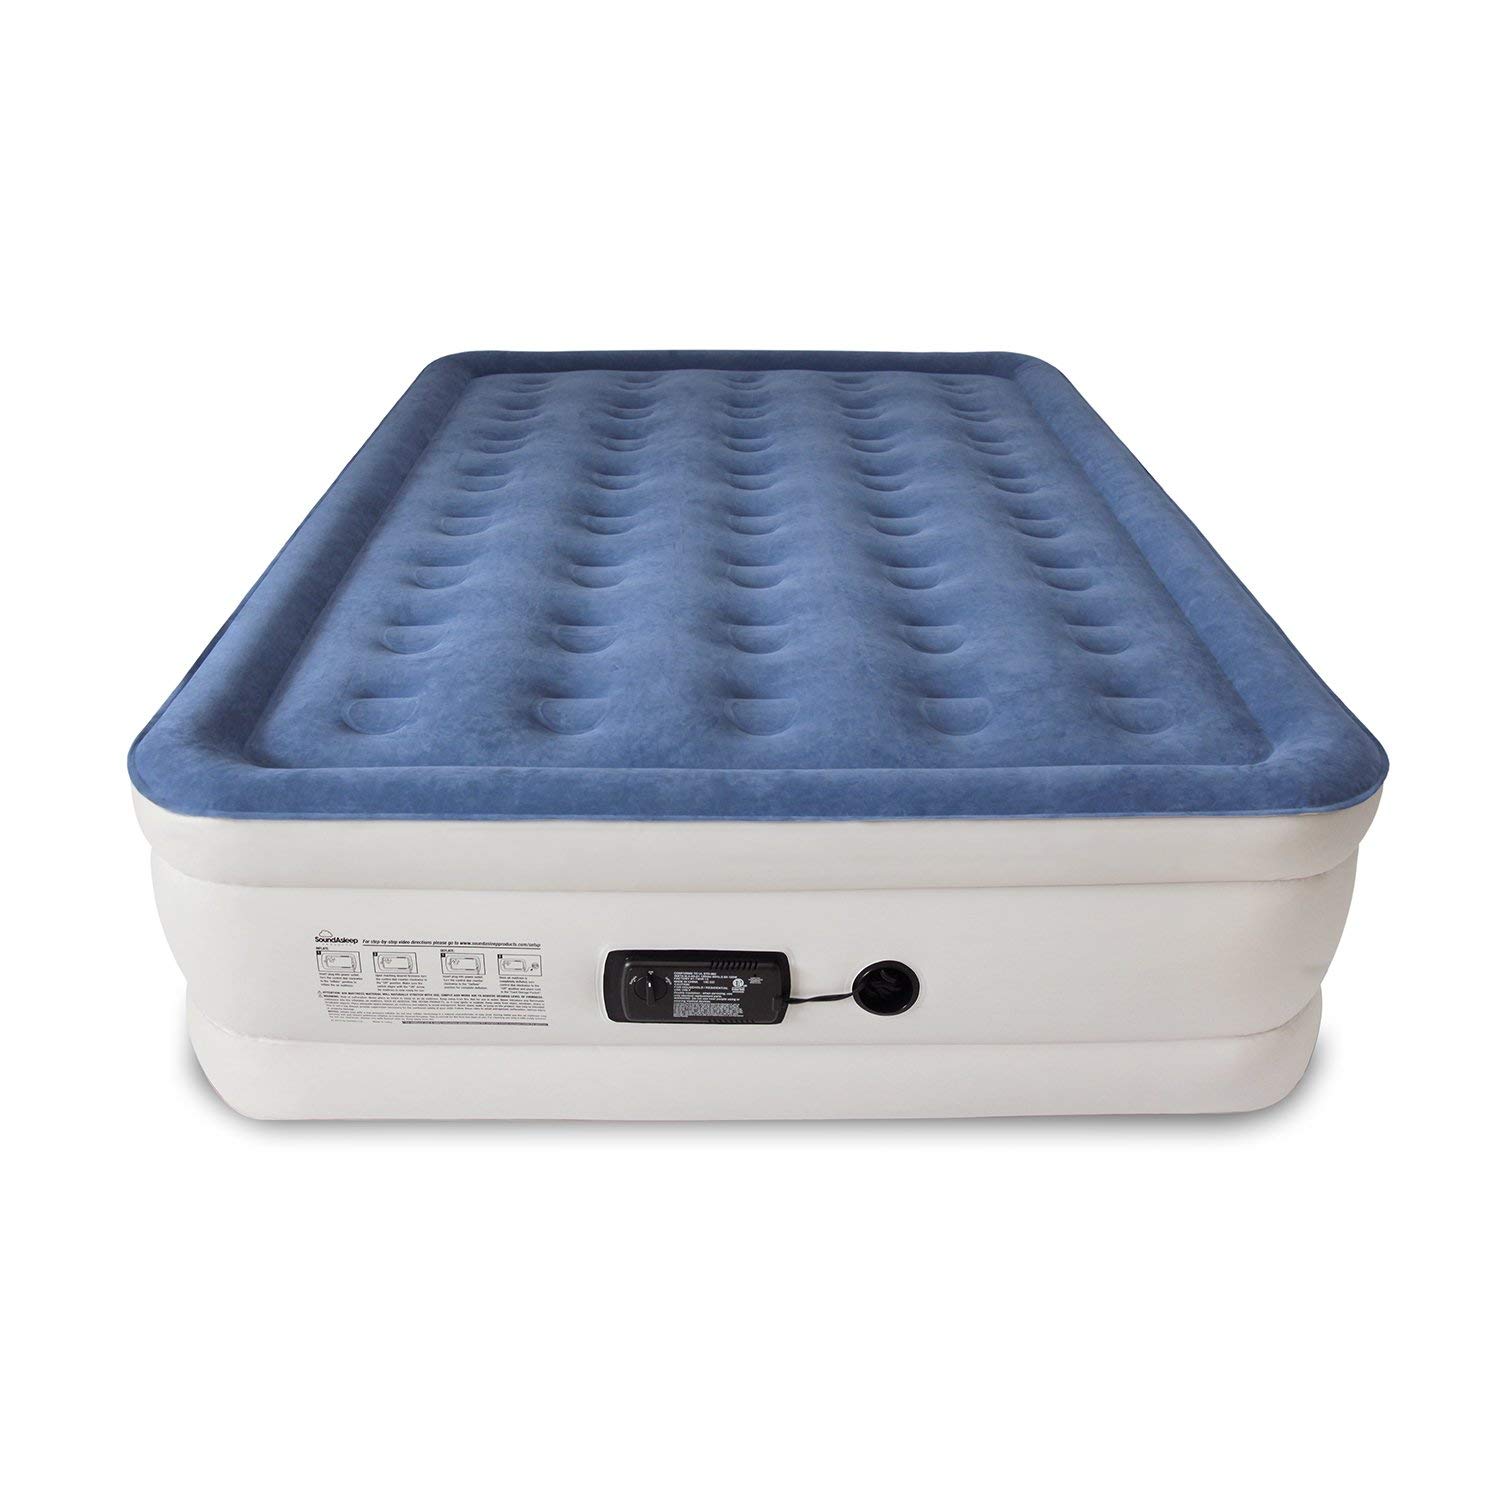 best air mattresses to use at home Top 6 Best Rated Air Mattress 2022 - Home Air Mattresses Reviews